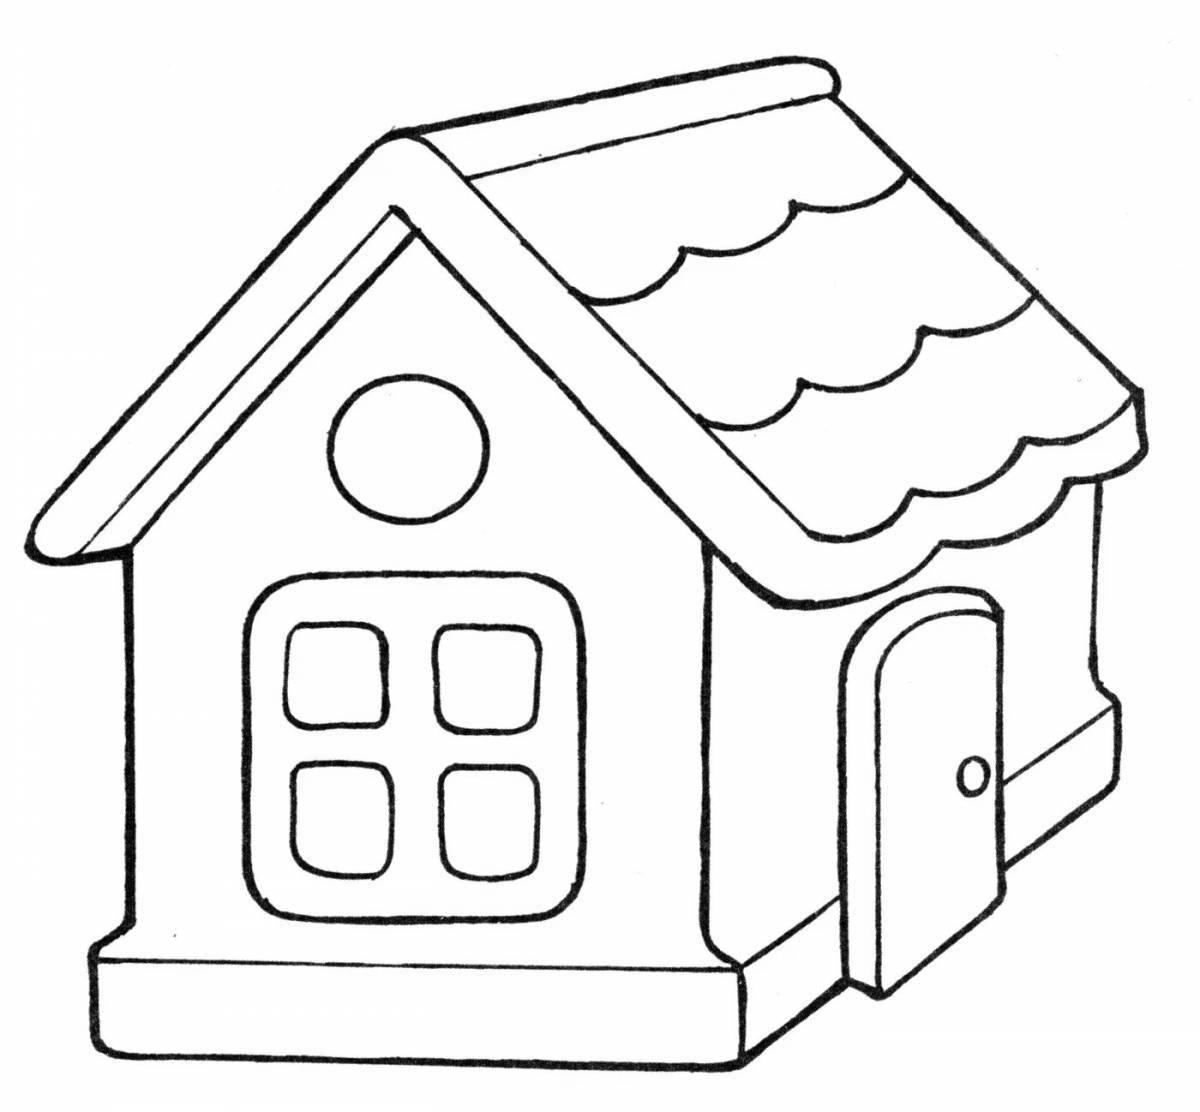 Colouring funny houses for boys